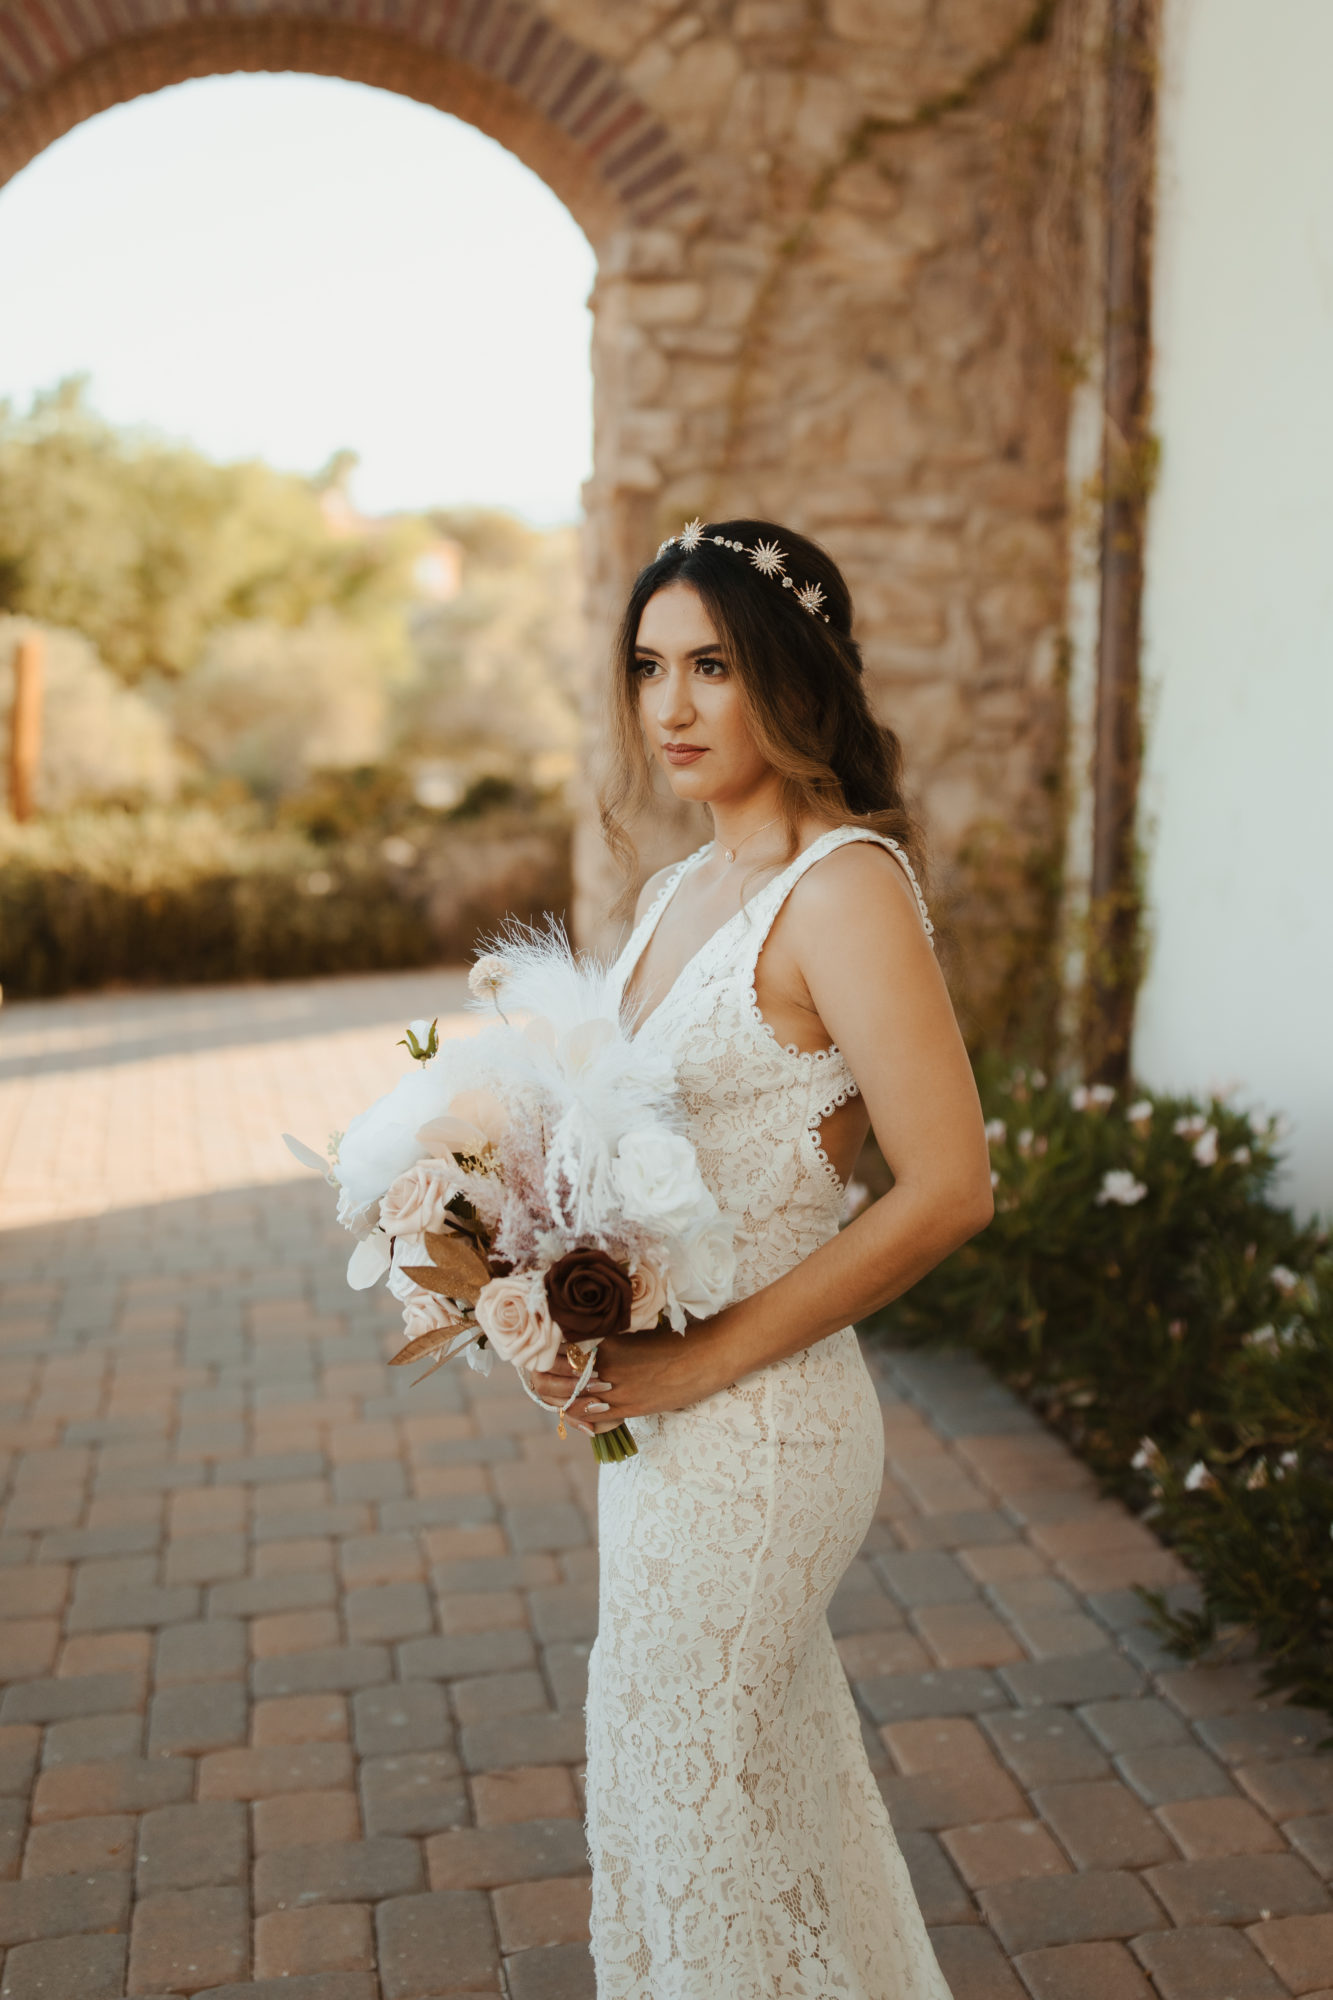 photo of bride outside the wedding venue showcasing her bridal bouquet